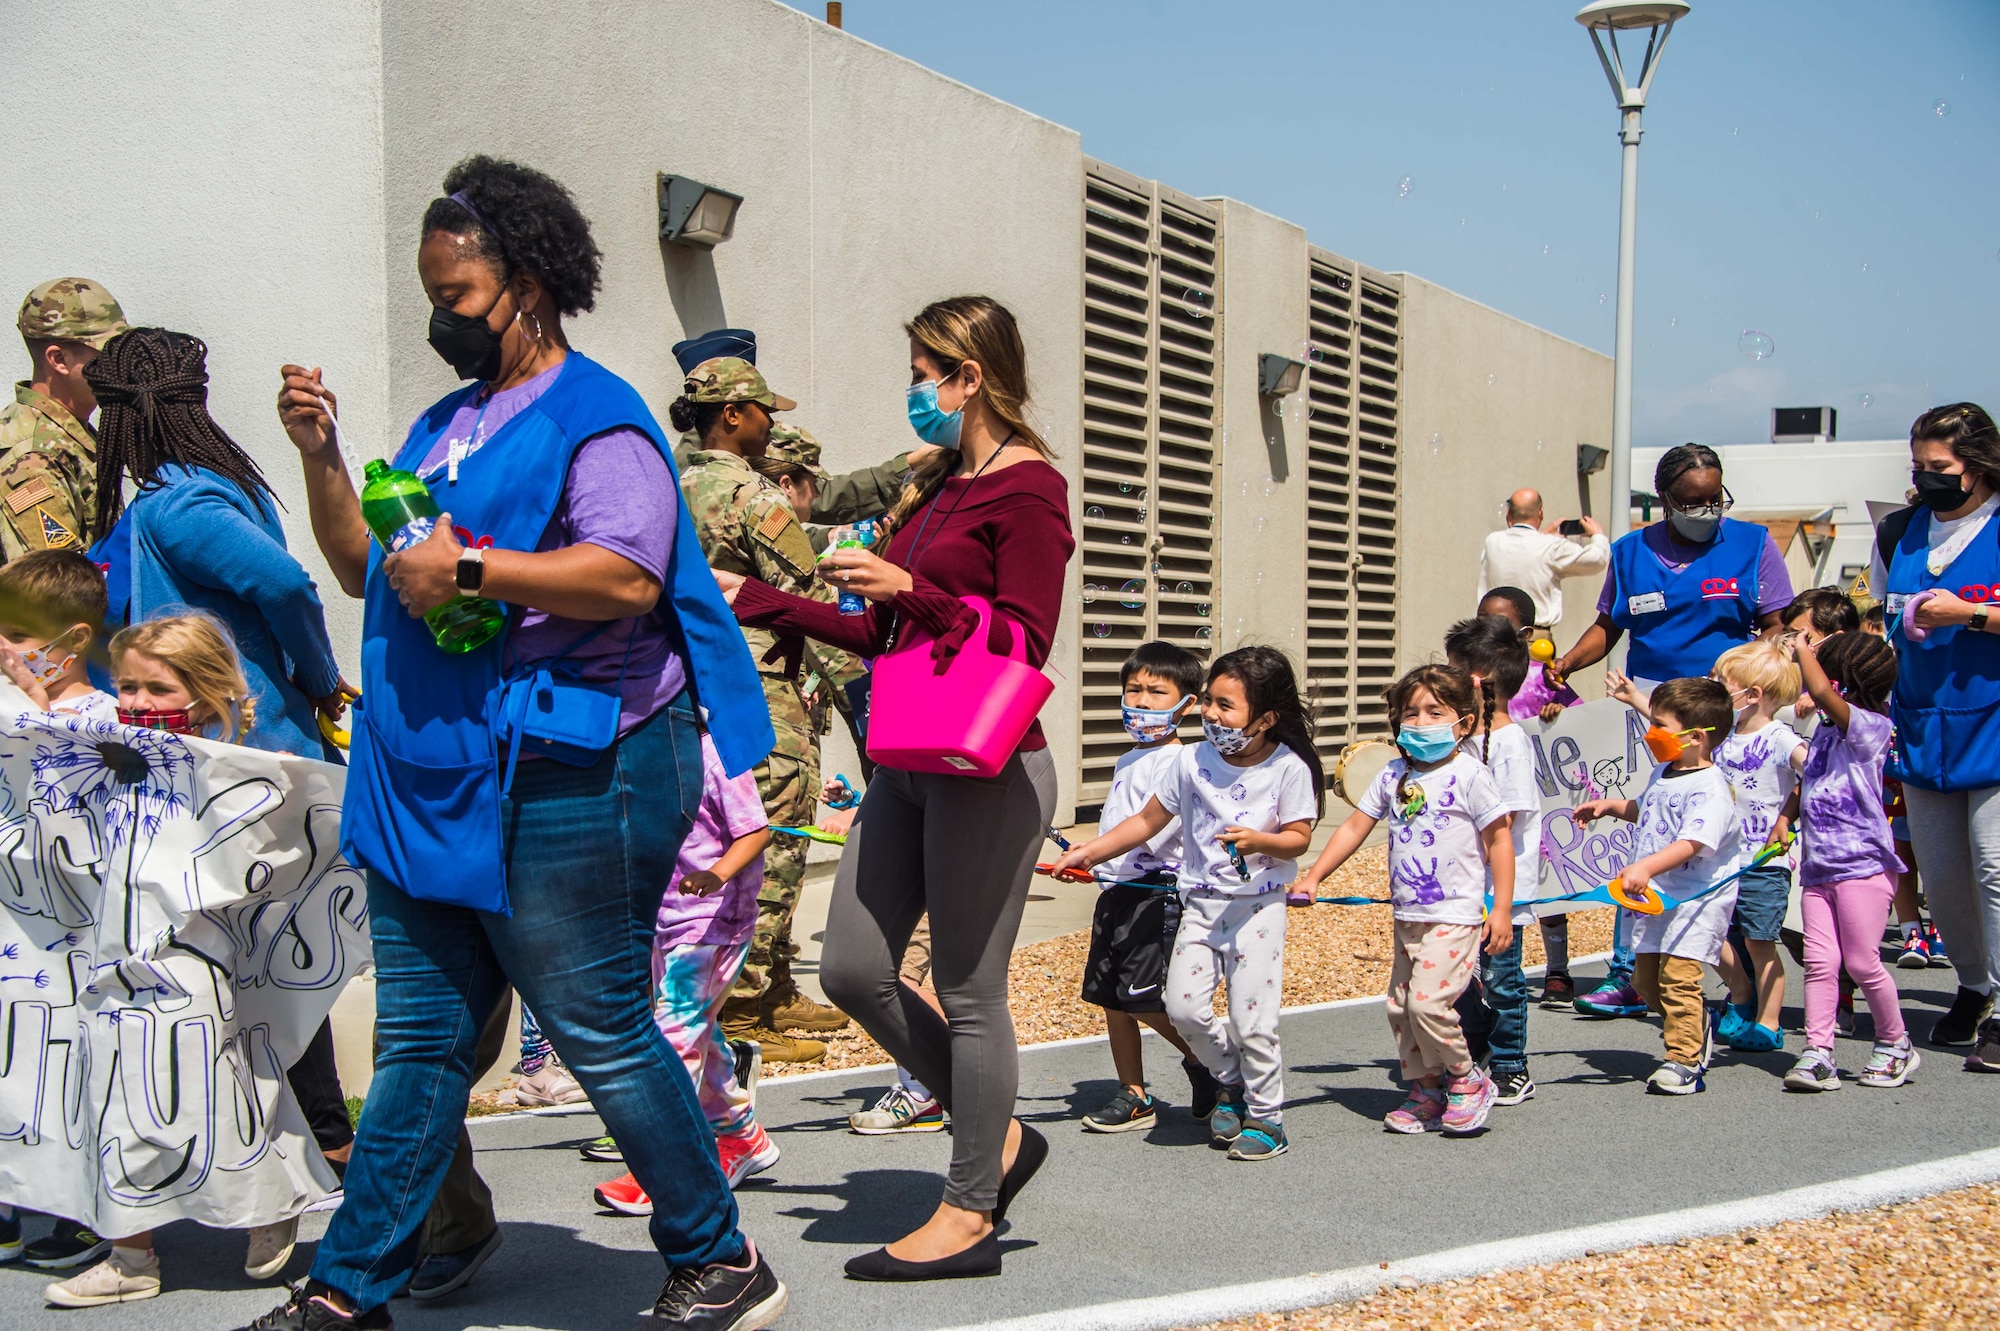 The Child Development Center children and staff celebrated the Month of the Military Child with a walking parade around the installation as base members applauded the procession. Each April, Los Angeles AFB recognizes and thanks the children of our service members.